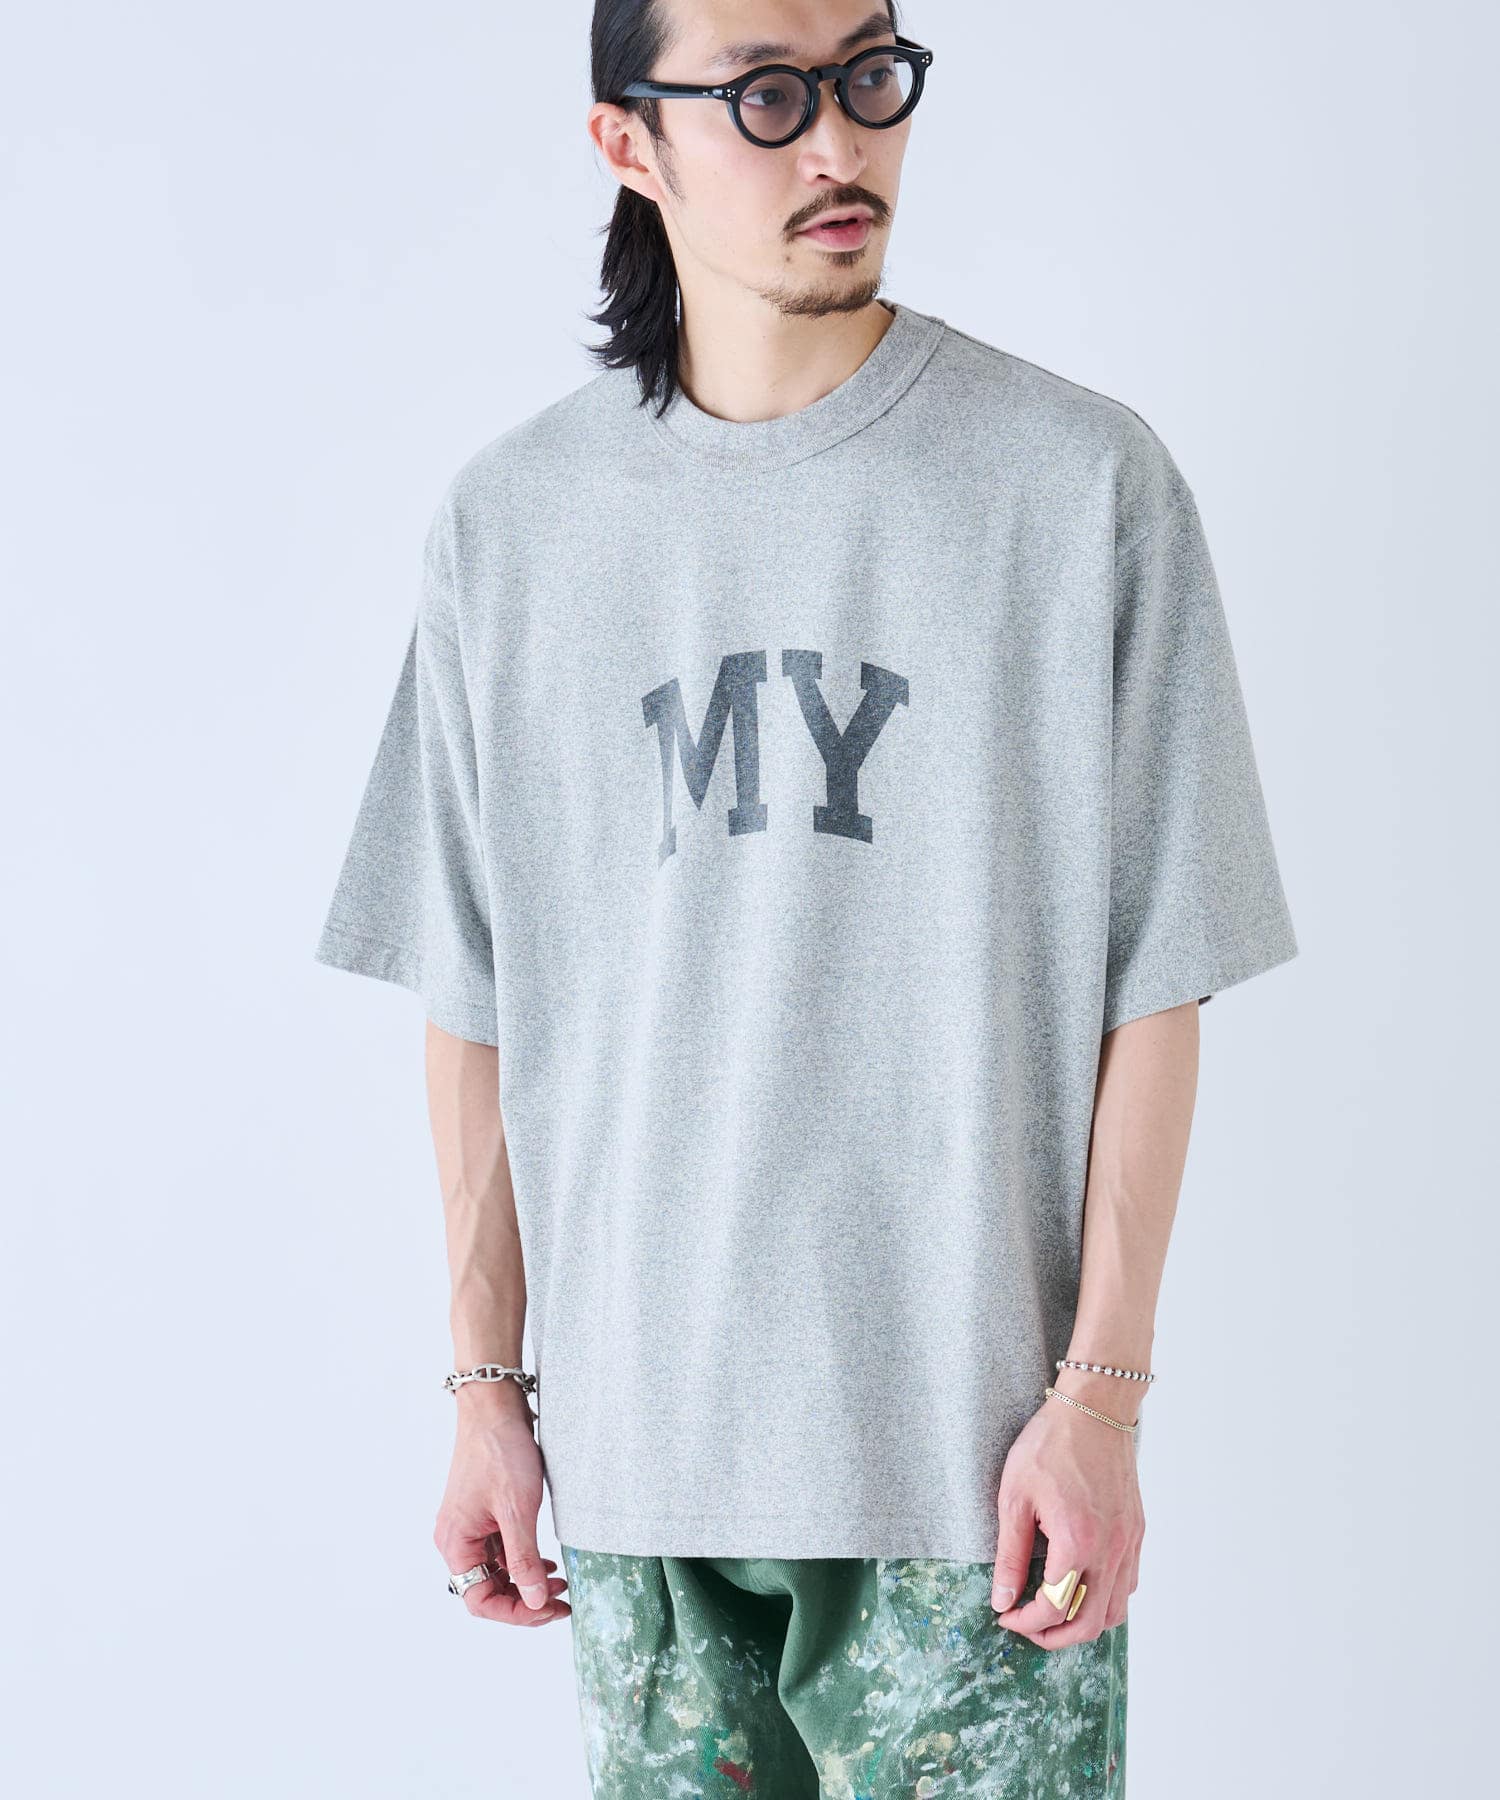 blurhms ROOTSTOCK / Army Tee | BLOOM&BRANCH(ブルームアンドブランチ 